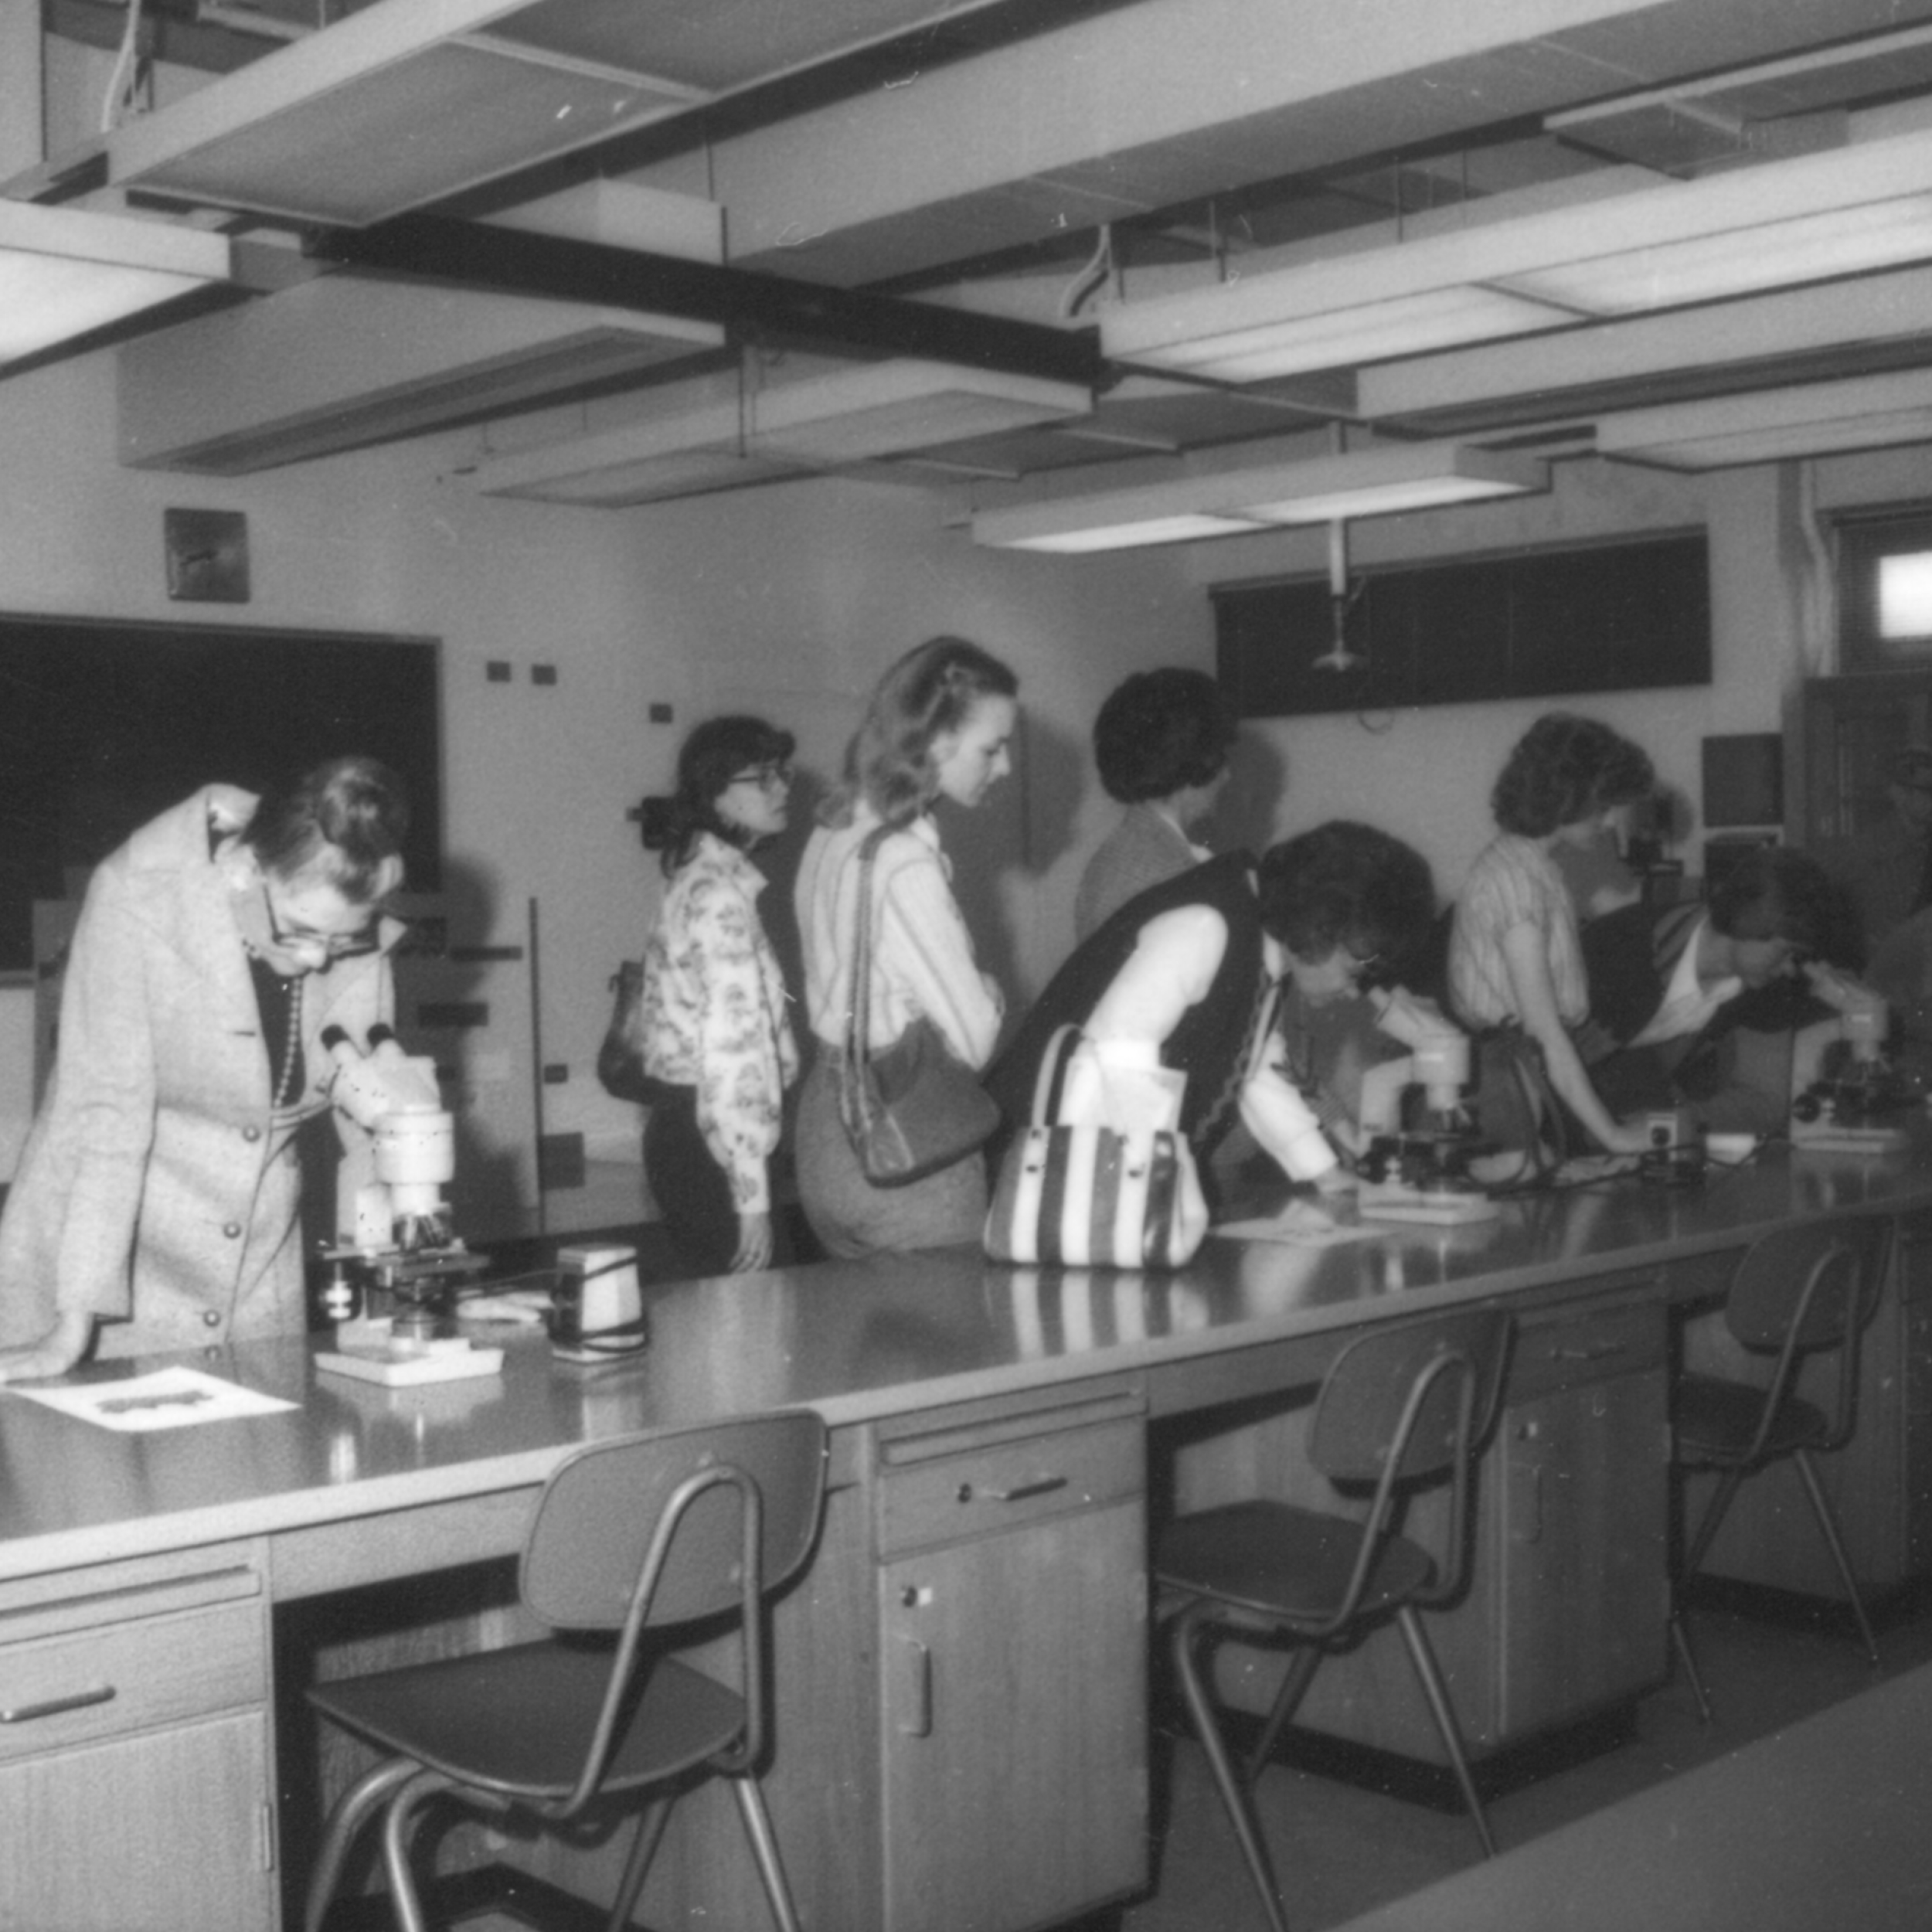 Attendees looking at microscopes at the first UTCVM open house in 1980 